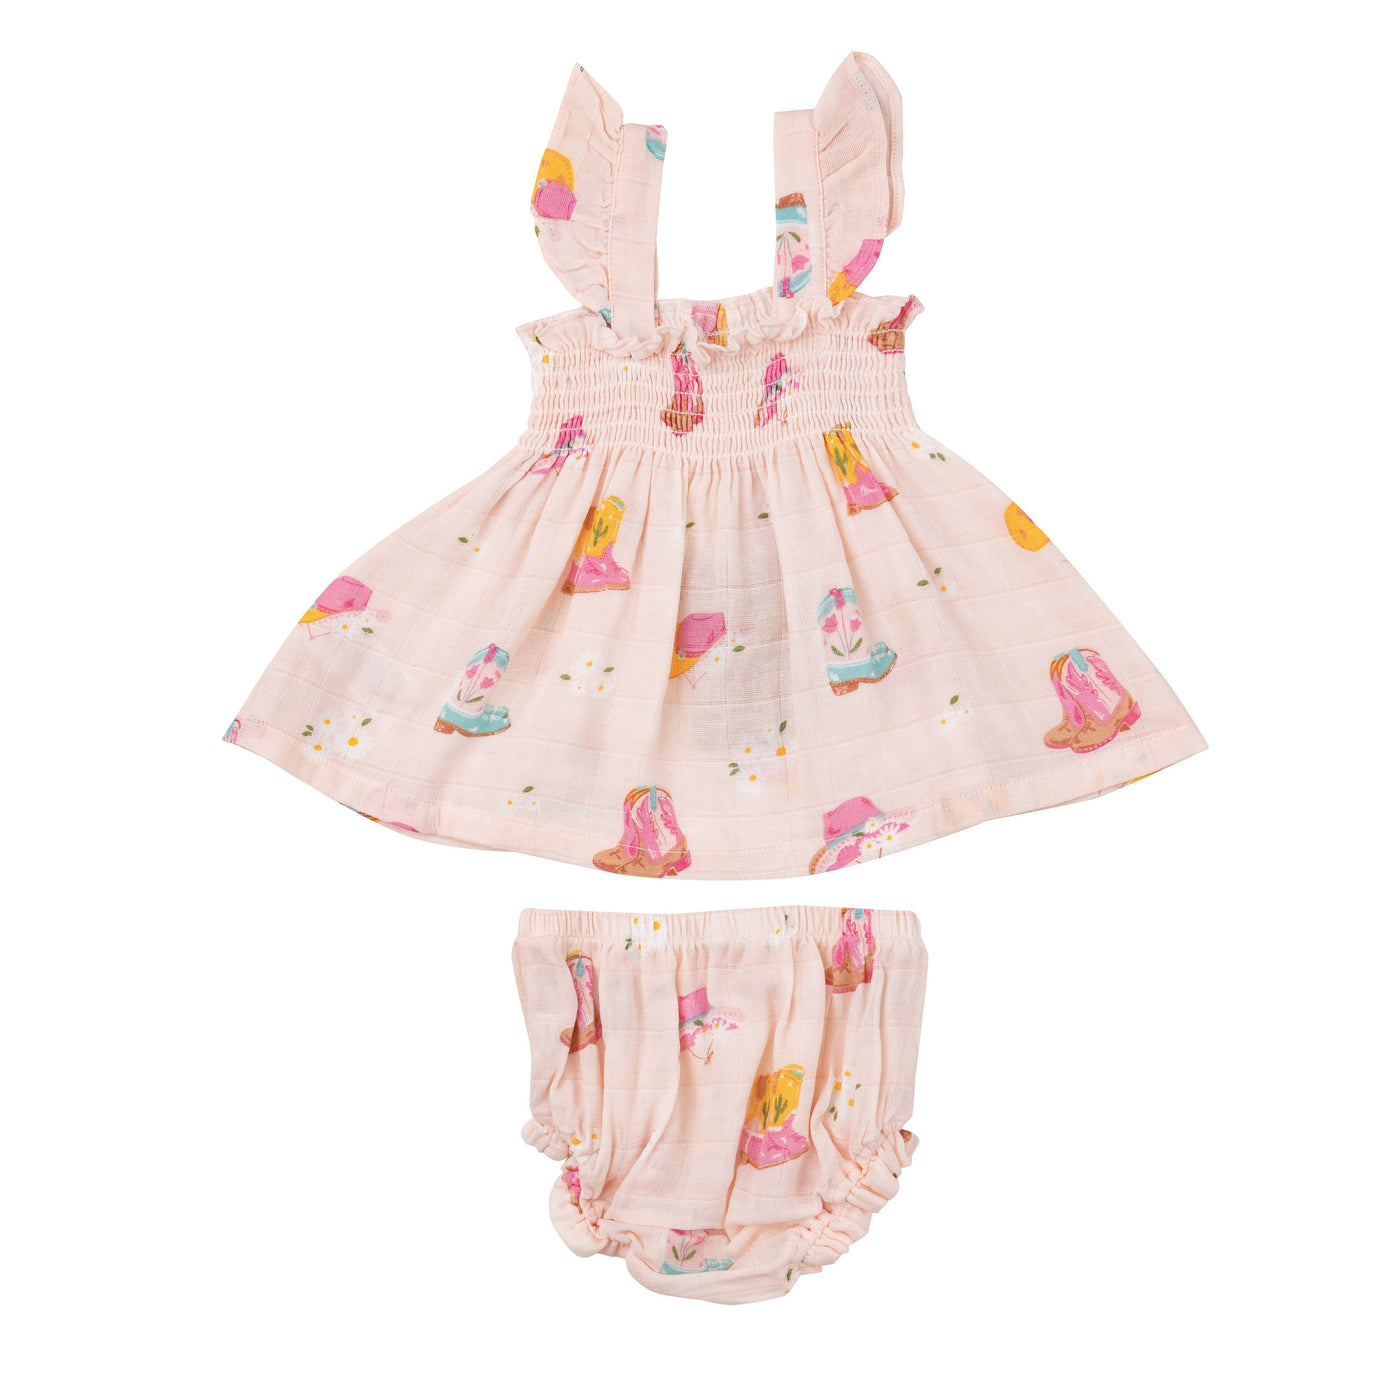 Ruffle Strap Smocked Top And Diaper Cover - Daisy Boots - Angel Dear